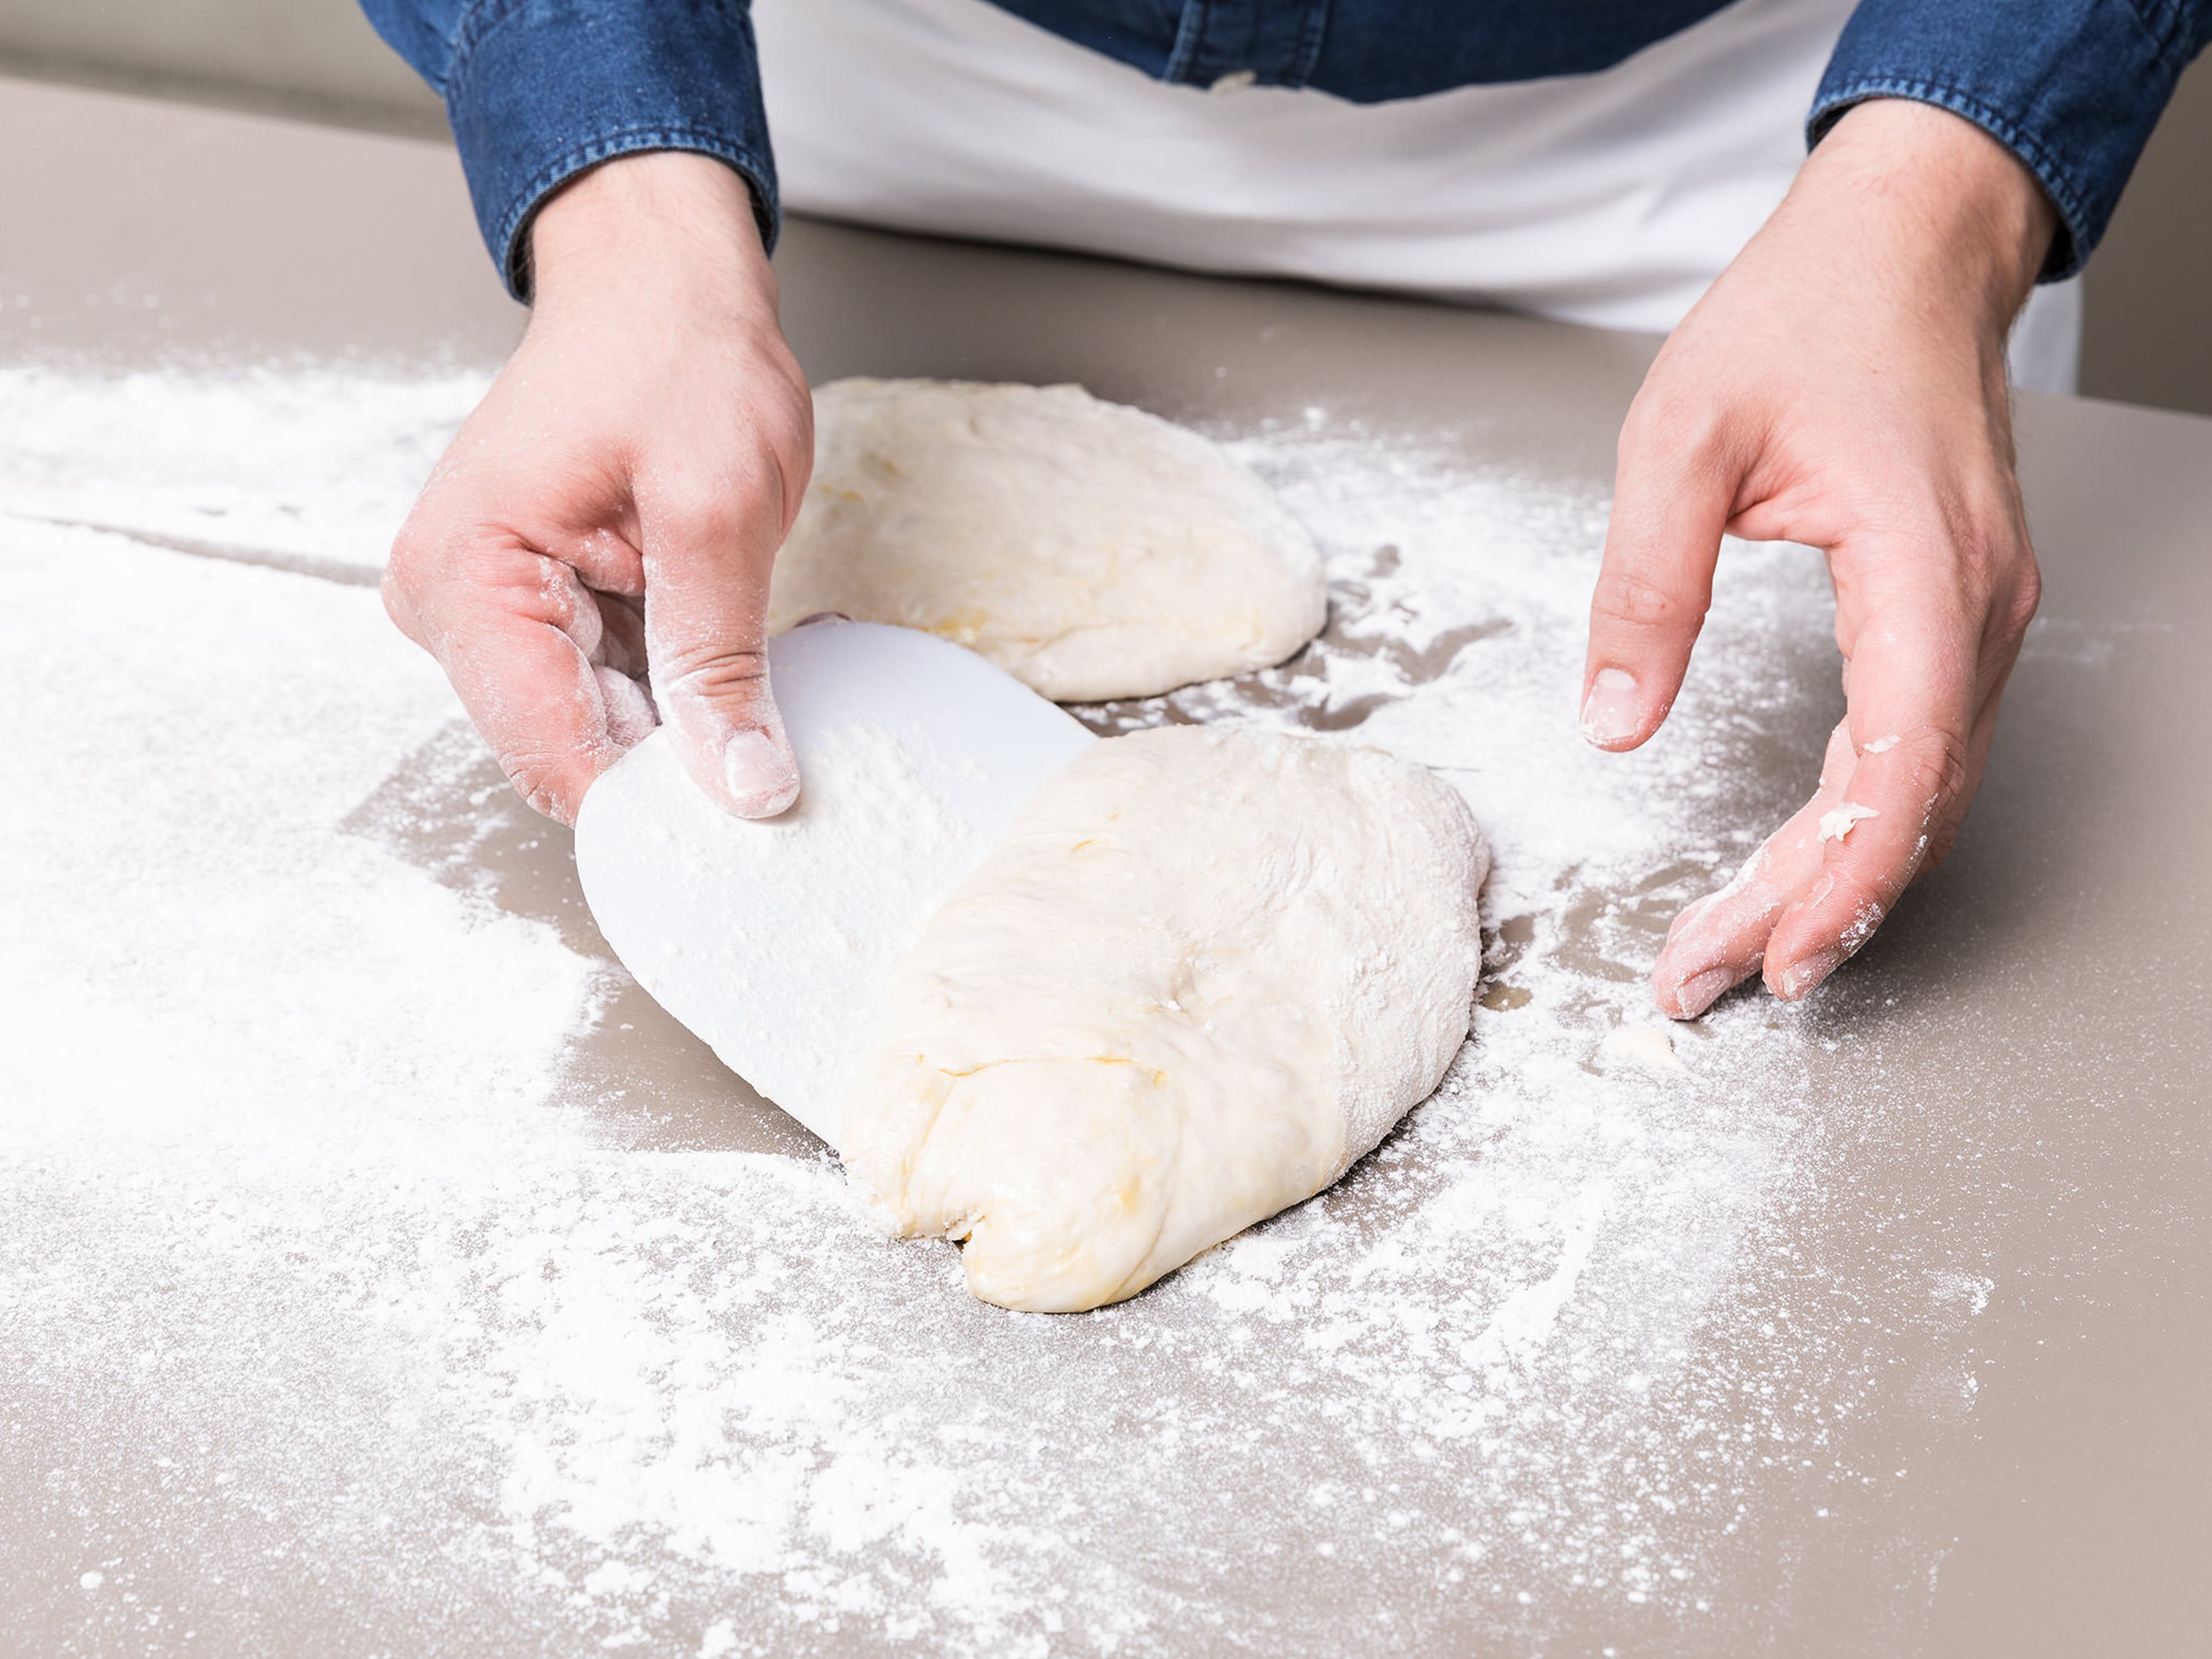 Transfer dough to a floured work surface, sprinkling with more flour as needed. Pat the dough and use a bench scraper to help fold it into thirds a few times. Transfer to a greased baking sheet and cover with plastic. Let rest at room temperature until it has doubled in size, approx. 1 – 2 hrs.